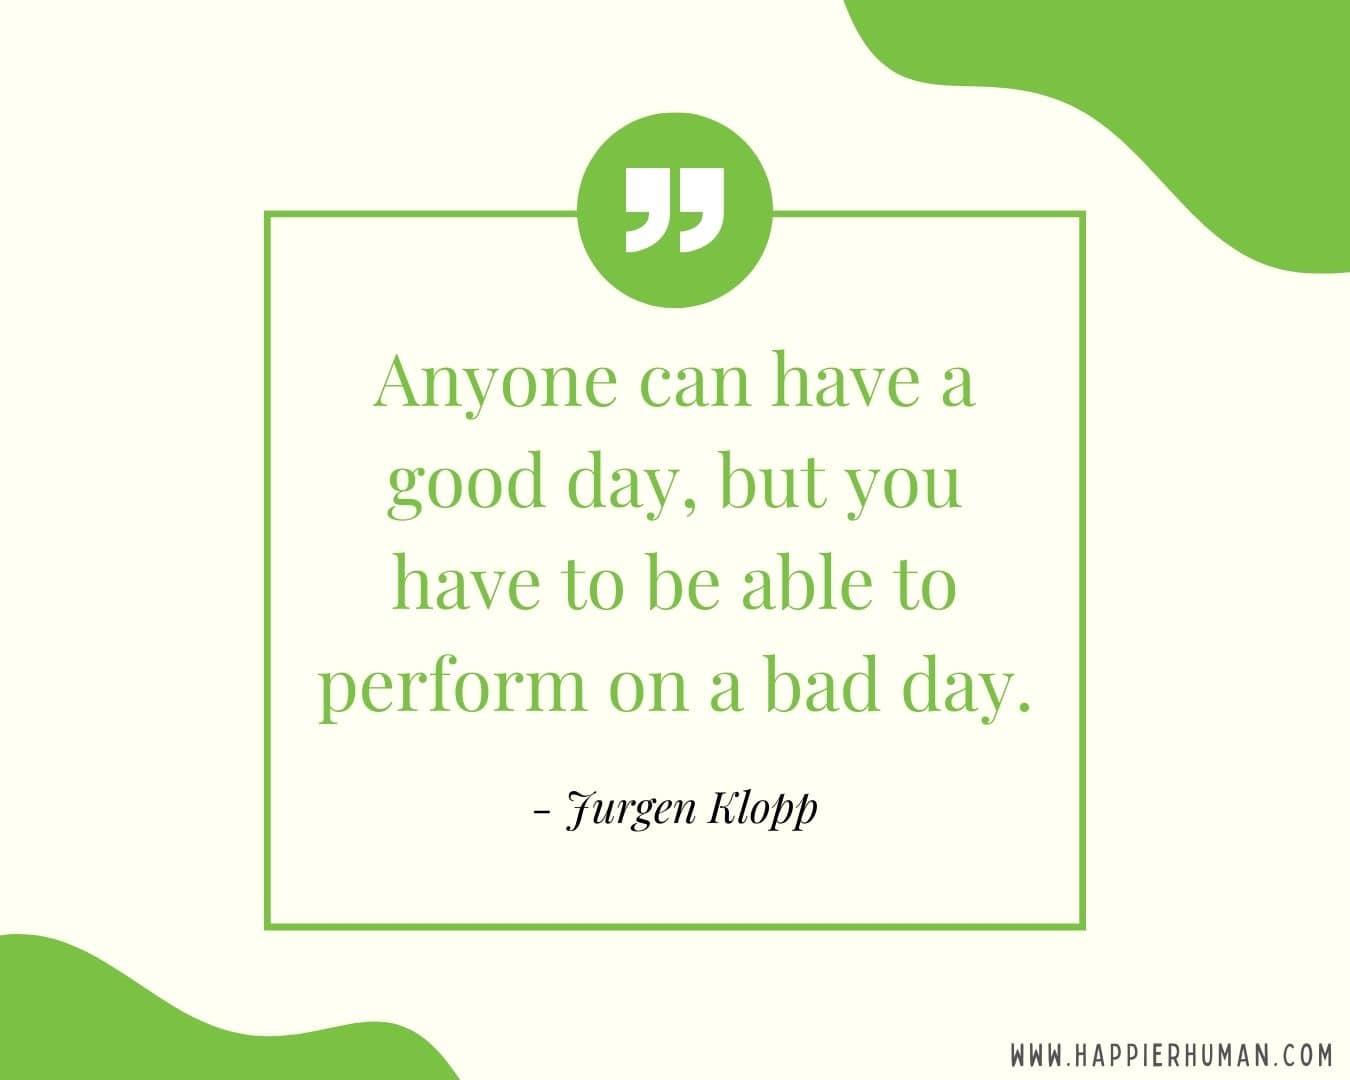 Great Day Quotes - “Anyone can have a good day, but you have to be able to perform on a bad day.” – Jurgen Klopp